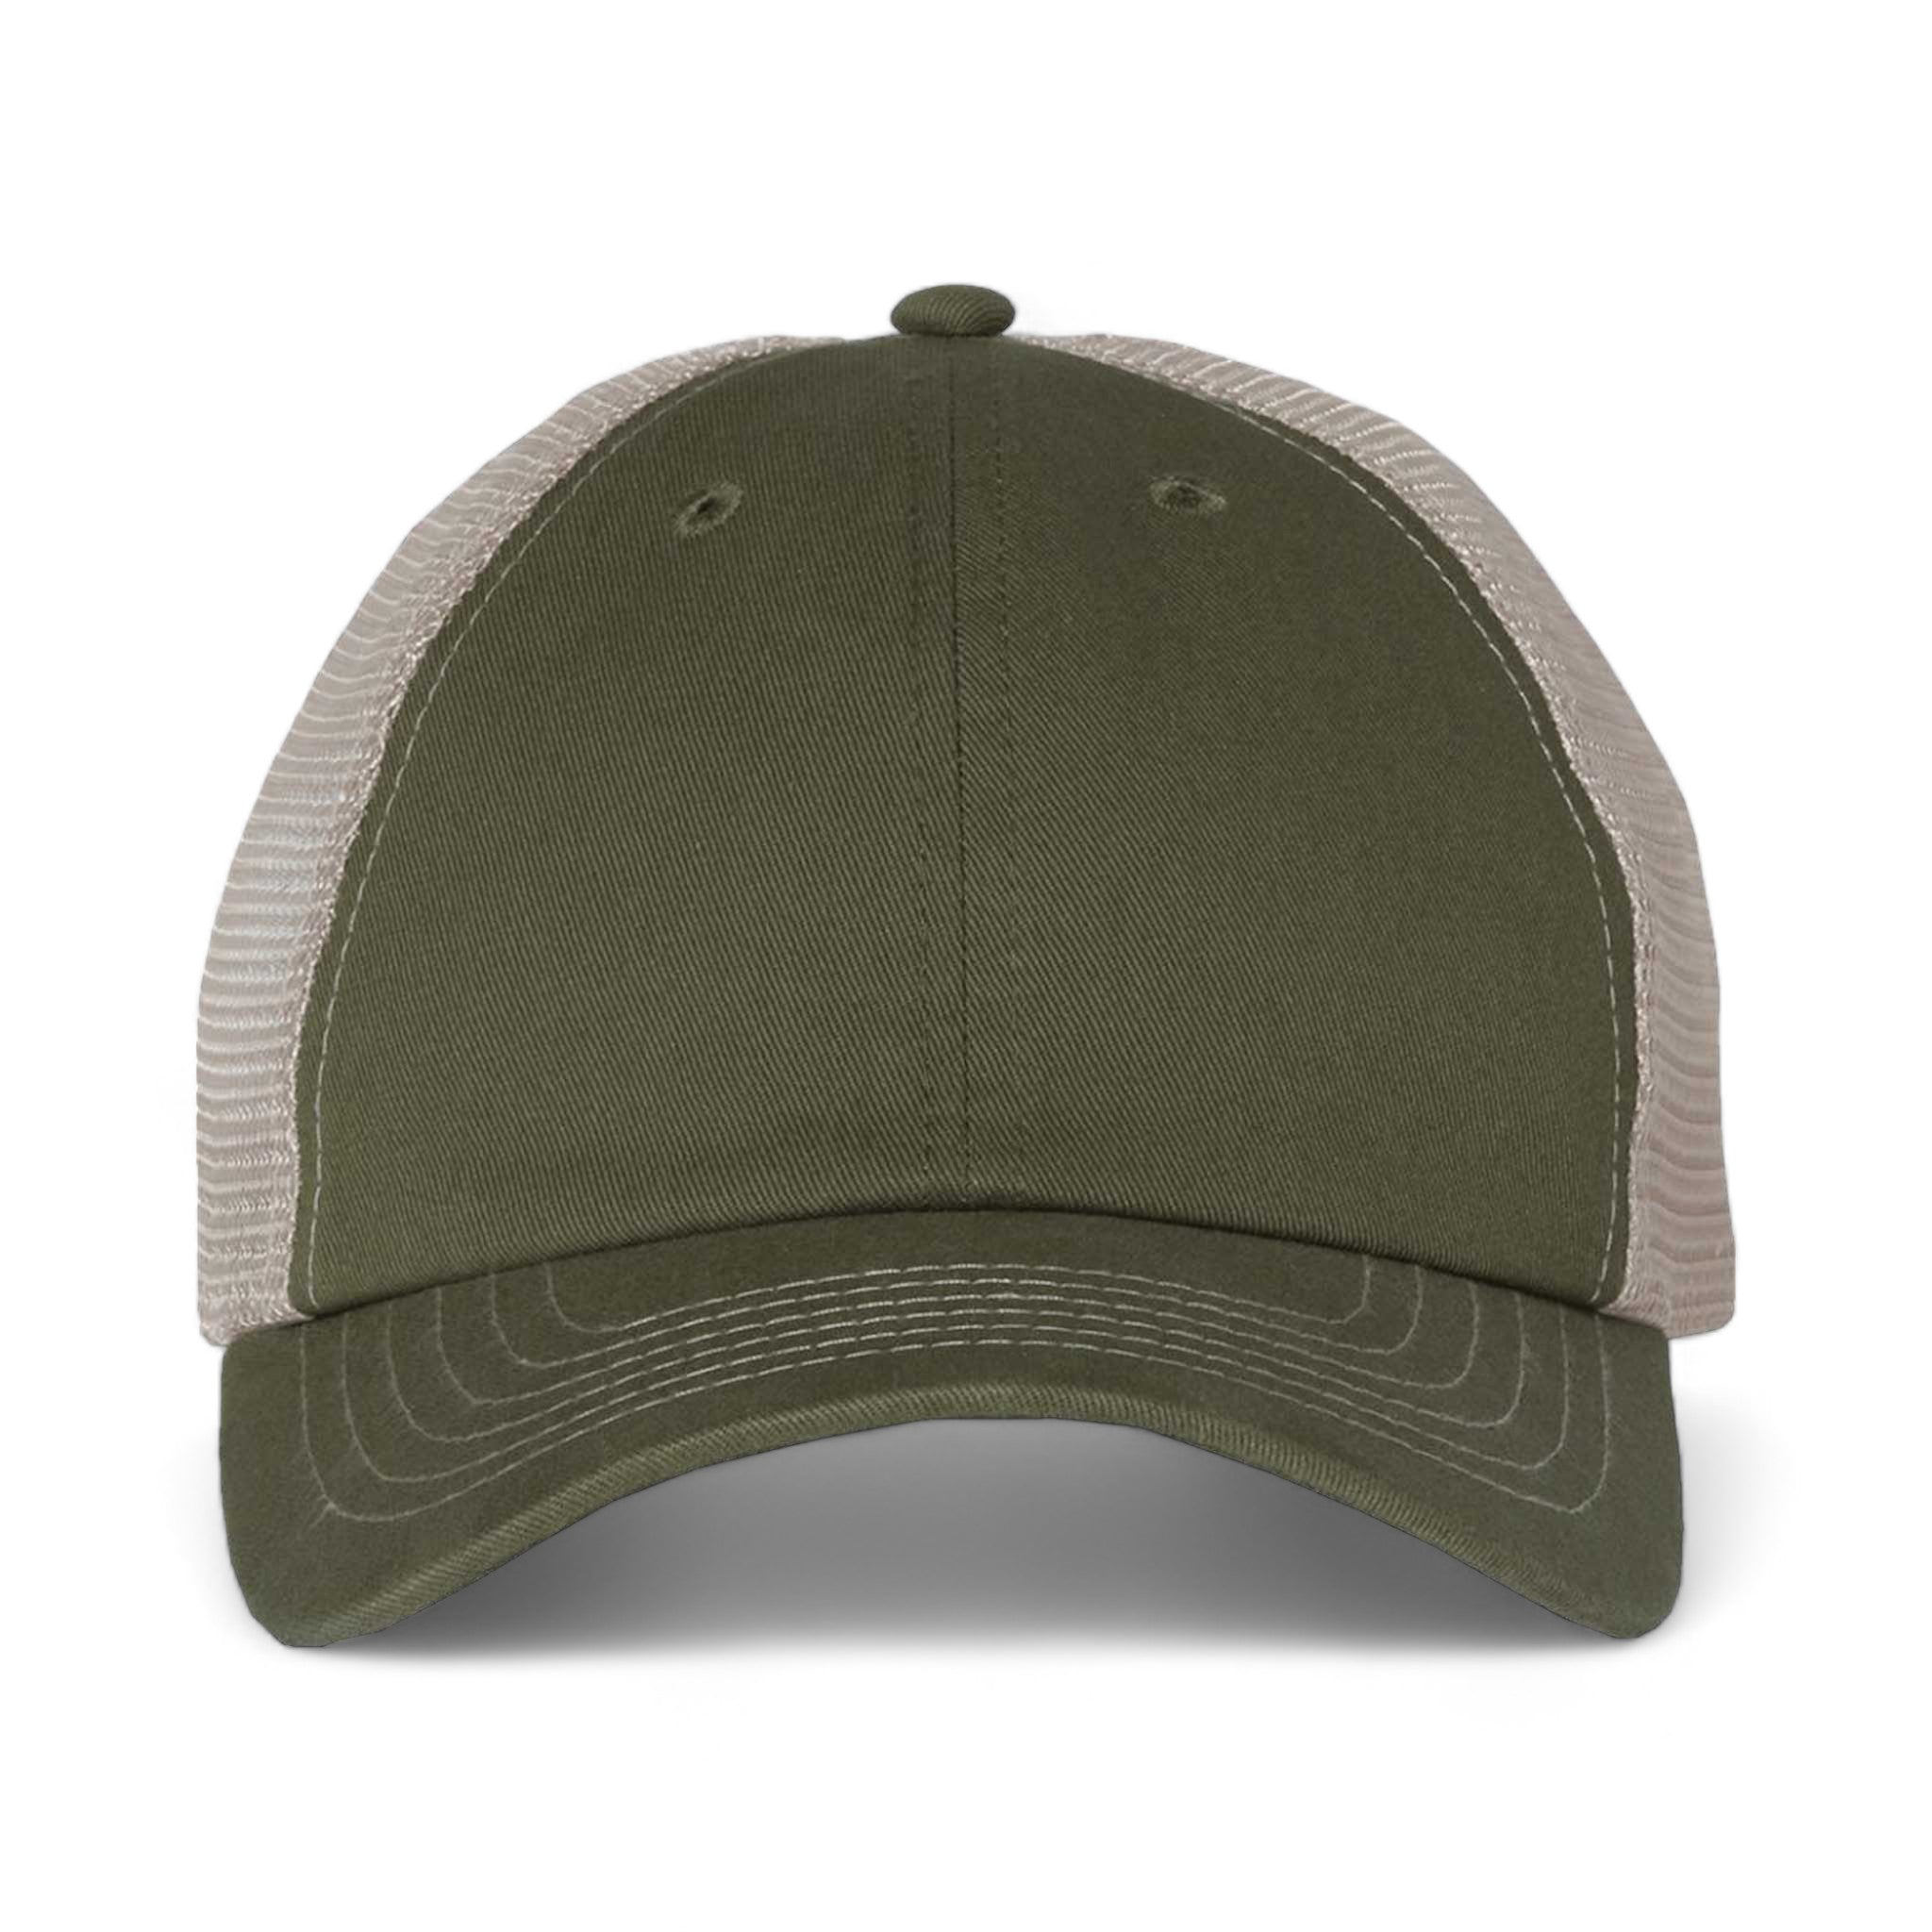 Front view of Sportsman 3100 custom hat in olive and khaki